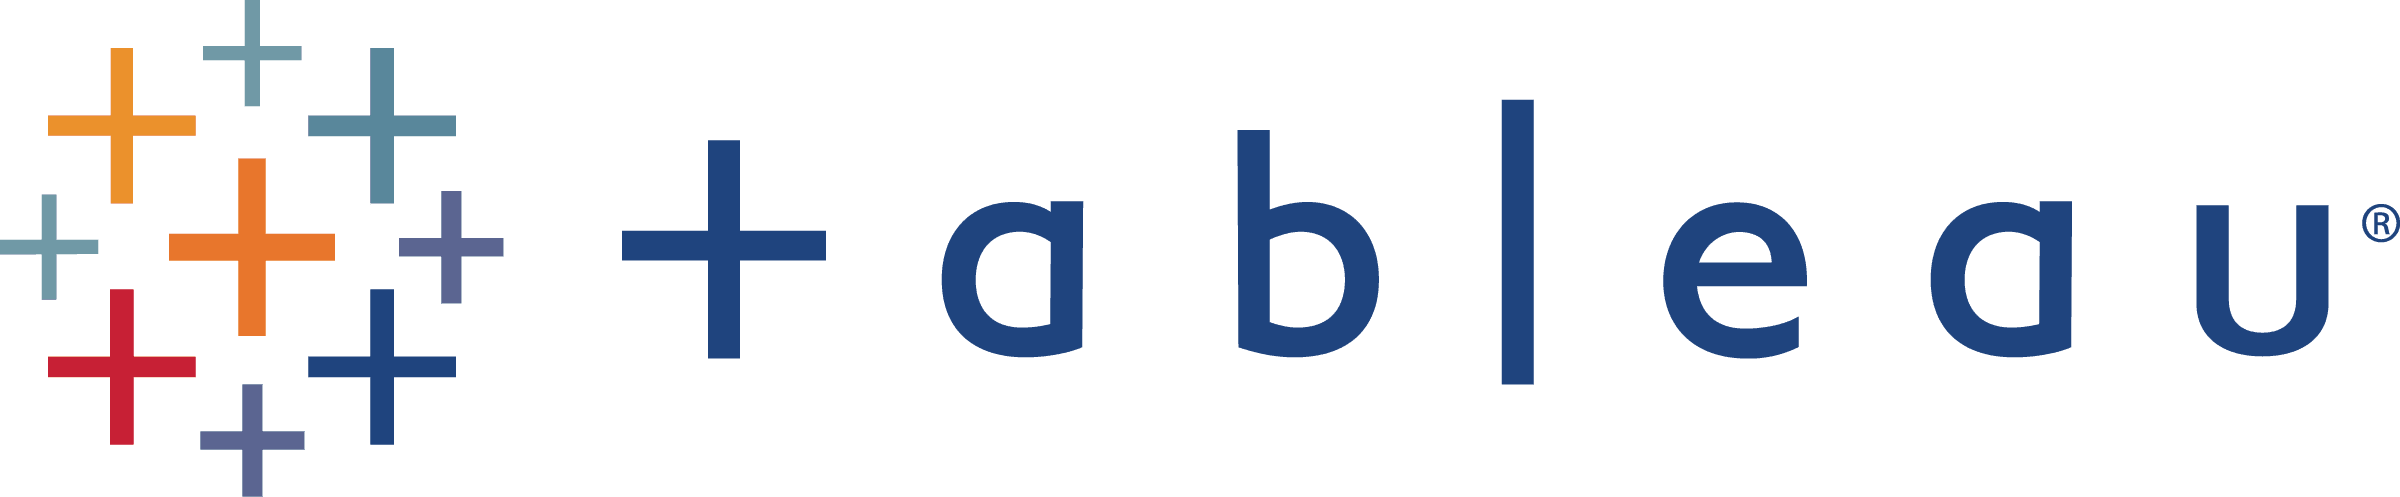 Meet tableau, Coveo AI-powered relevance engine user